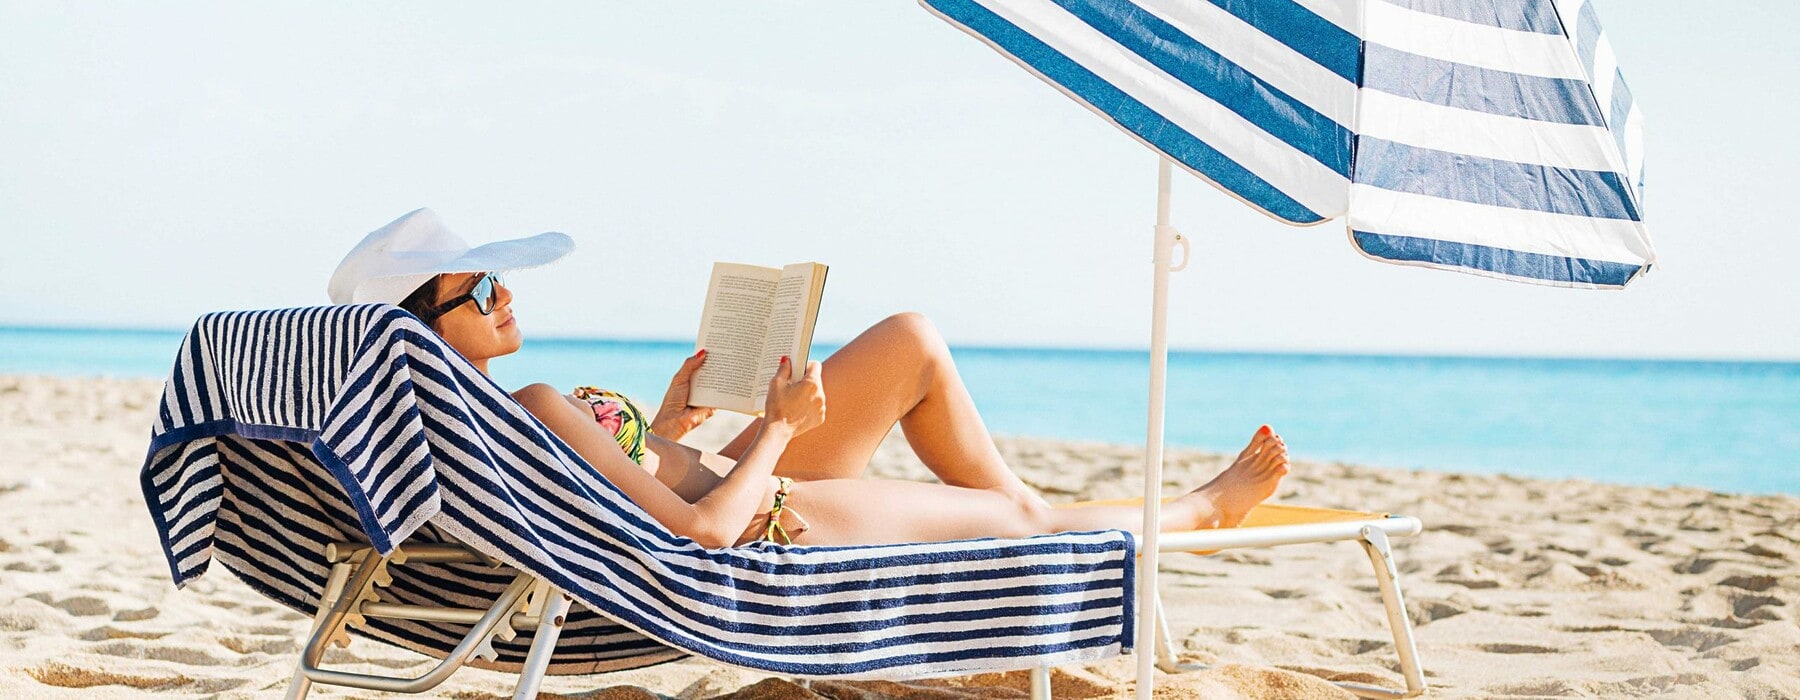 Woman reading on the beach under a blue striped umbrella on sun lounger